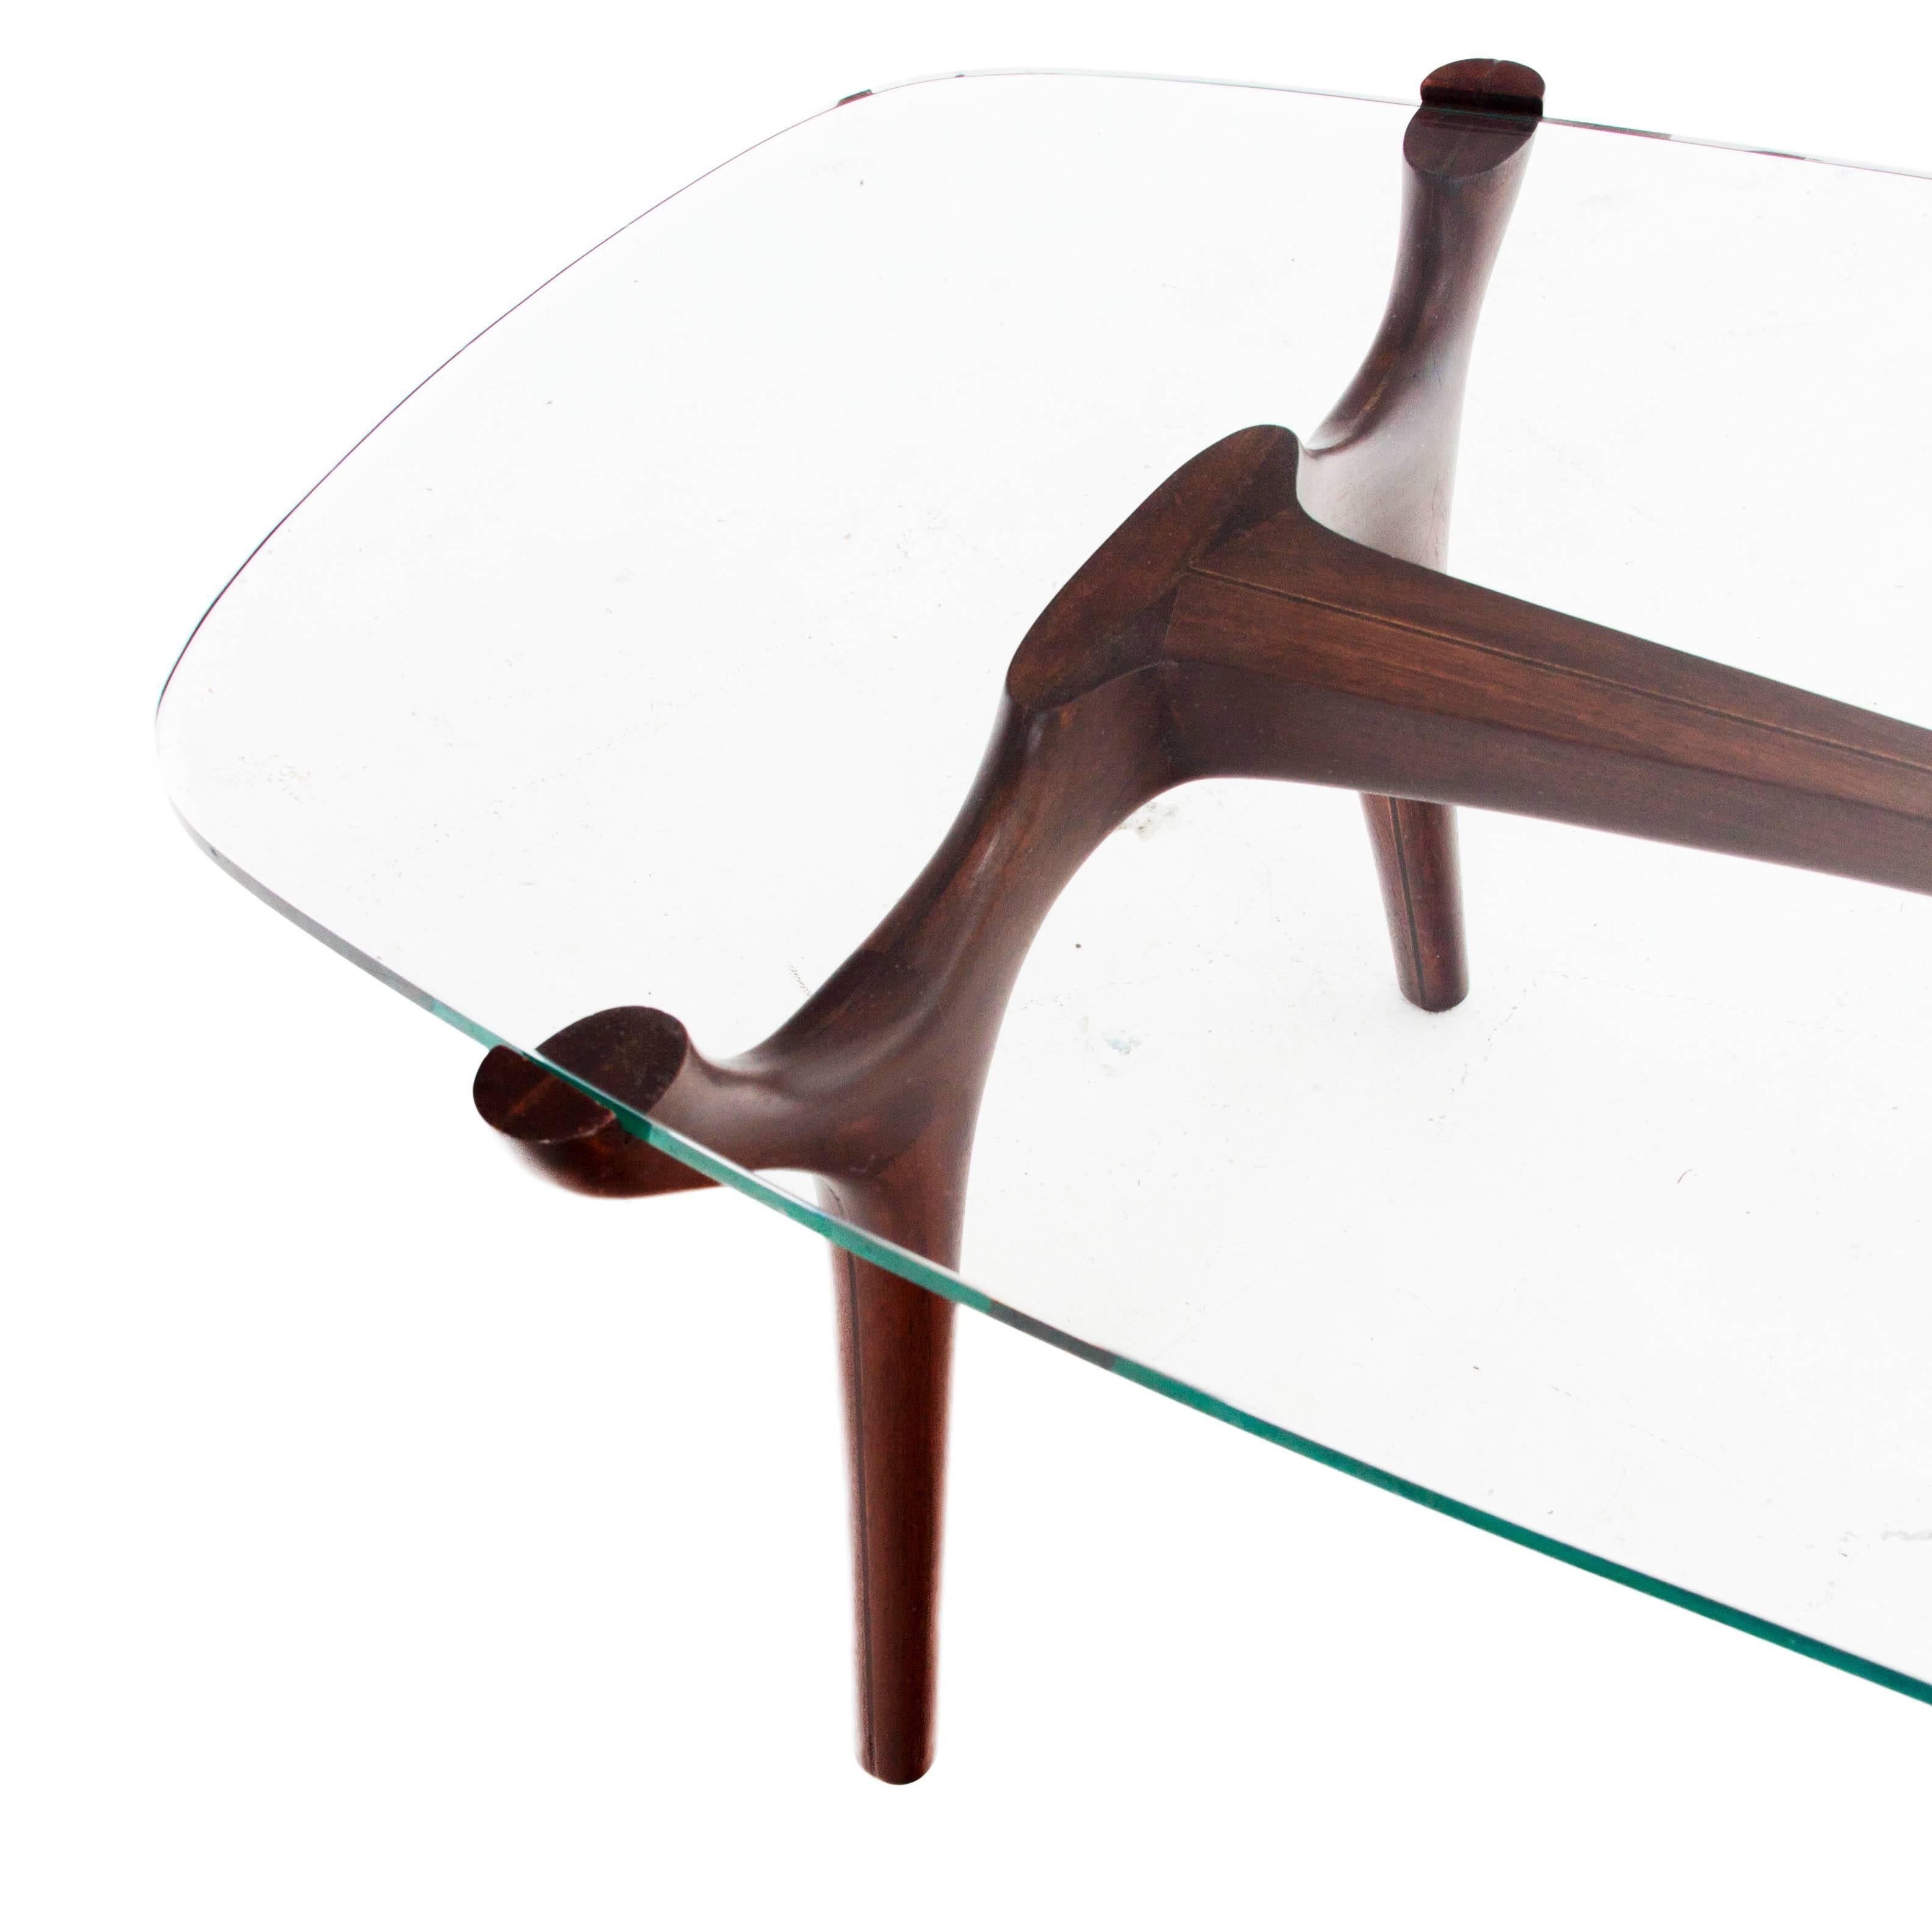 American Mid-Century Sculptural Coffee Table & Glass Top Attributed to Bertha Schaefer